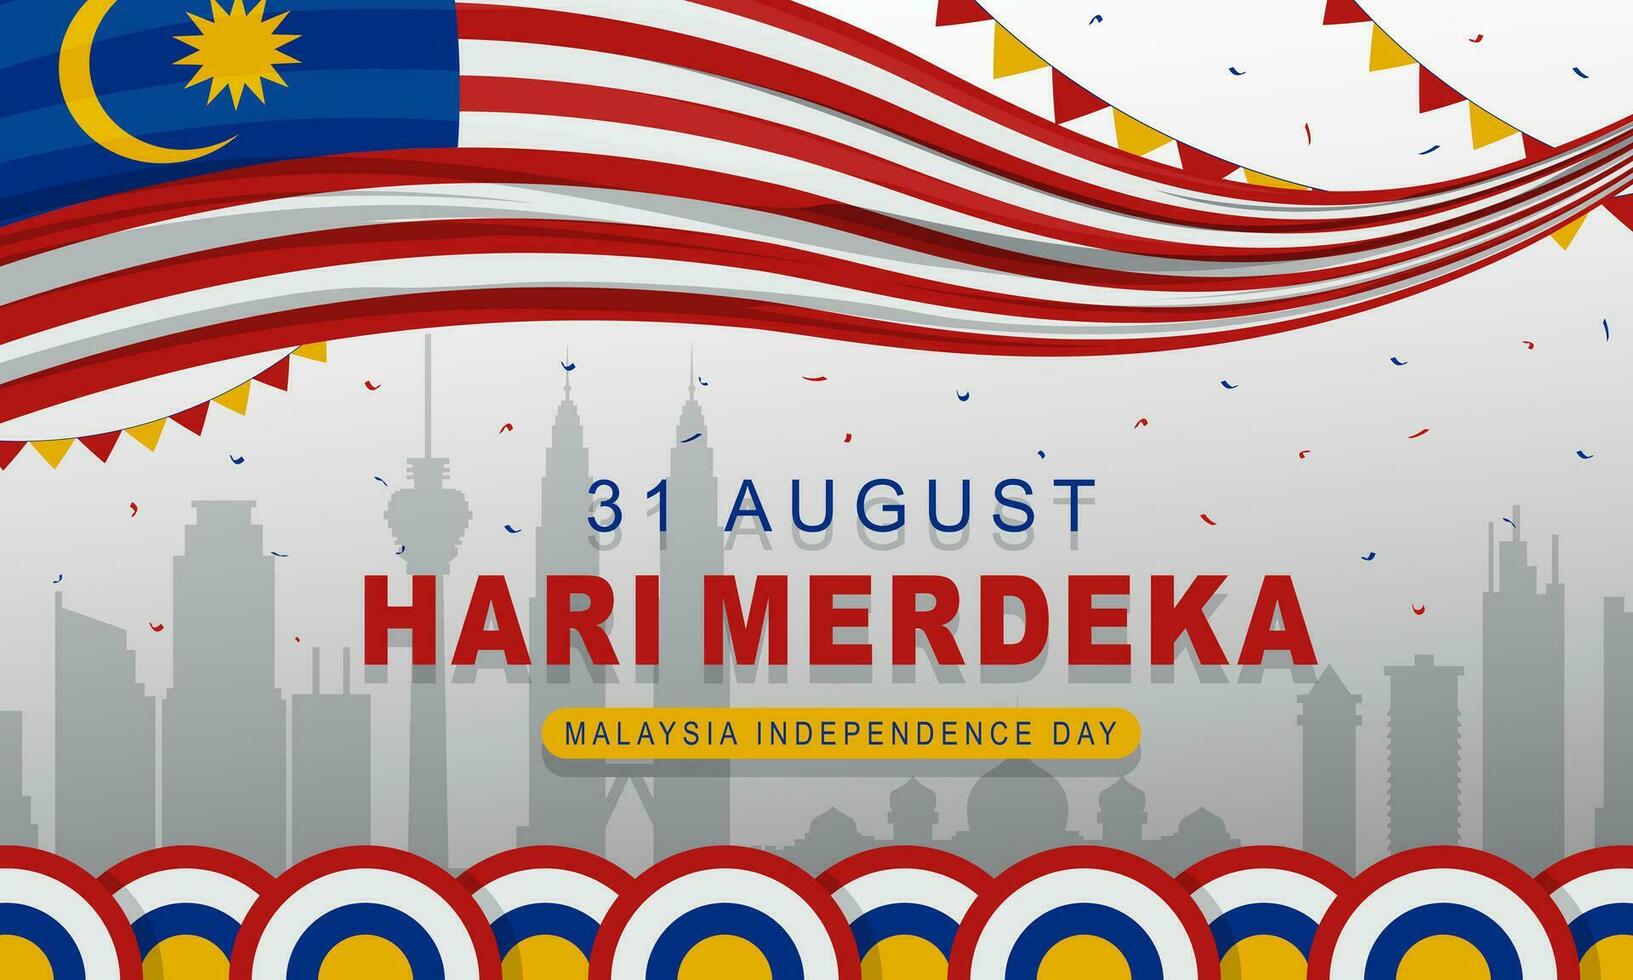 Malaysia Flag banner design Hari Merdeka greeting which means Malaysia Independence Day vector